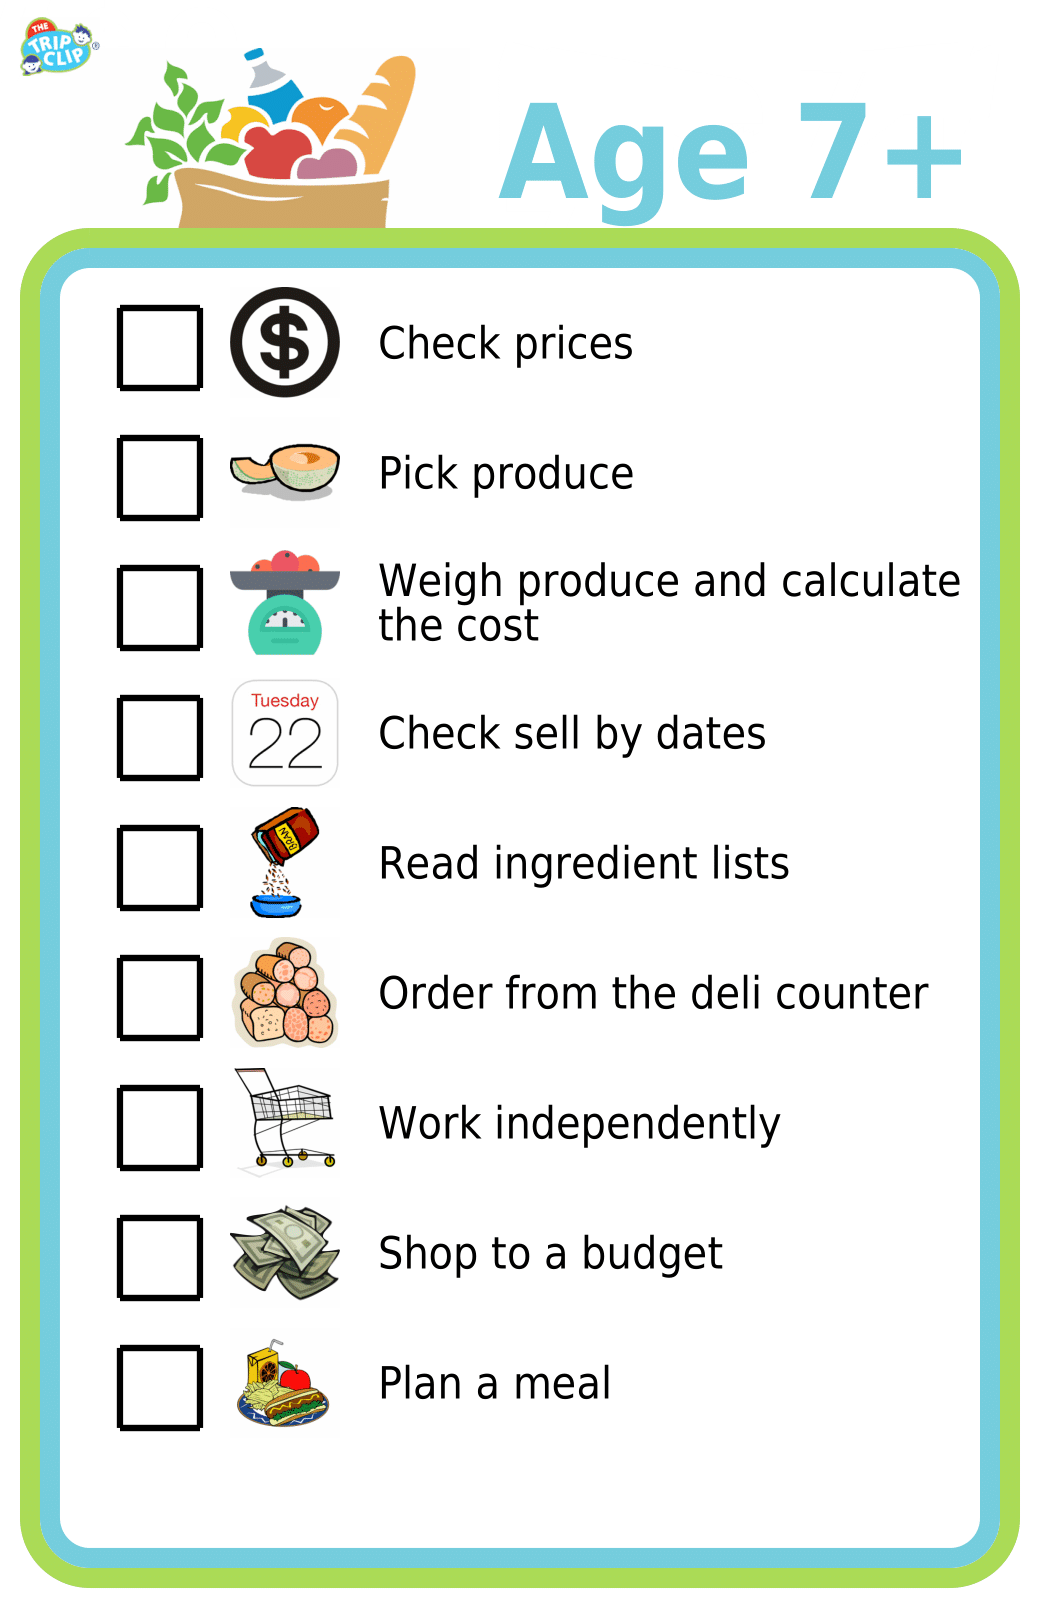 Picture checklist showing learning opportunities at the grocery store for kids 7 and up